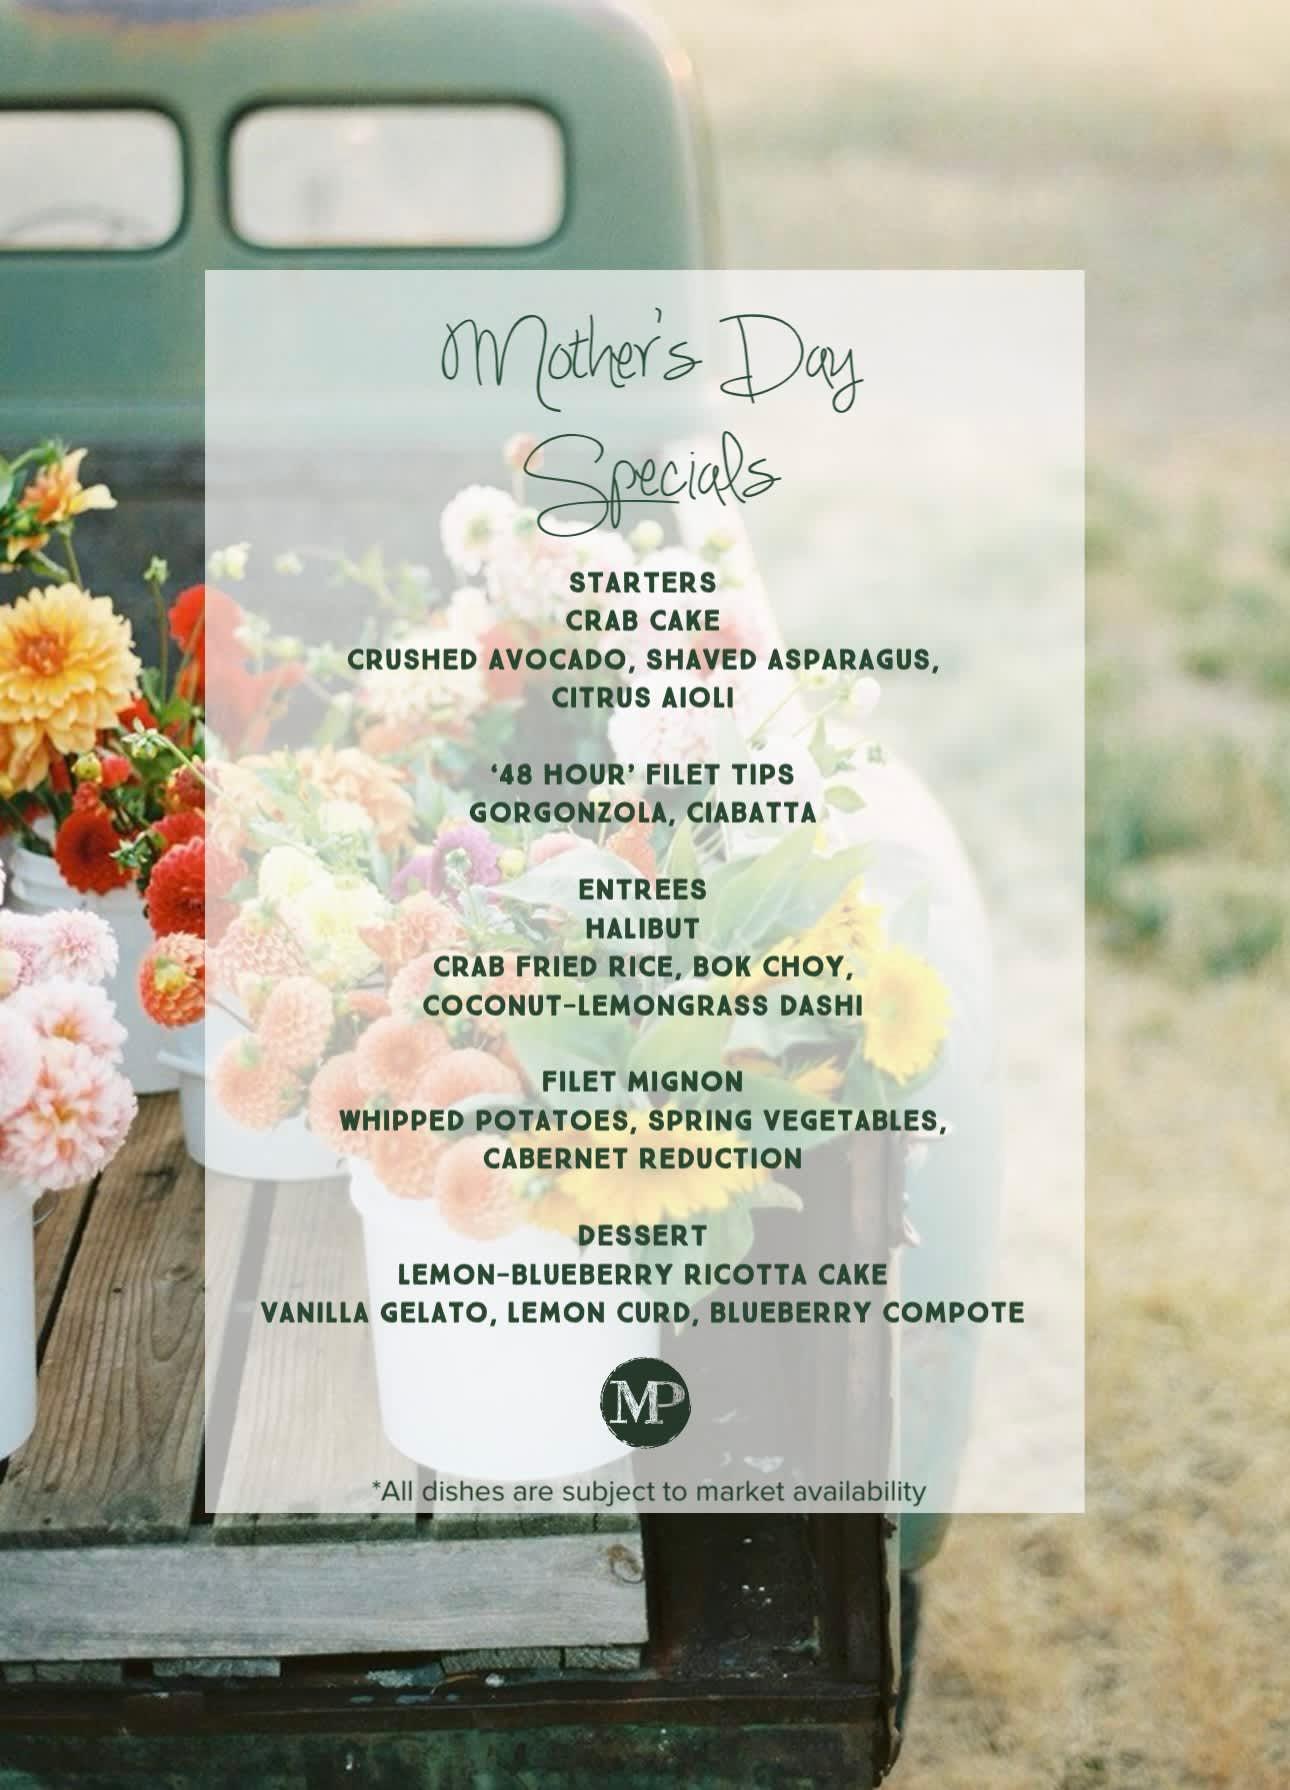 Mother’s Day Specials 💐
- We Open At 10:30AM Sunday
- Brunch Menu Available Until 3PM
- Specials & Regular Menu Available All Day

Get Those Reservations In!